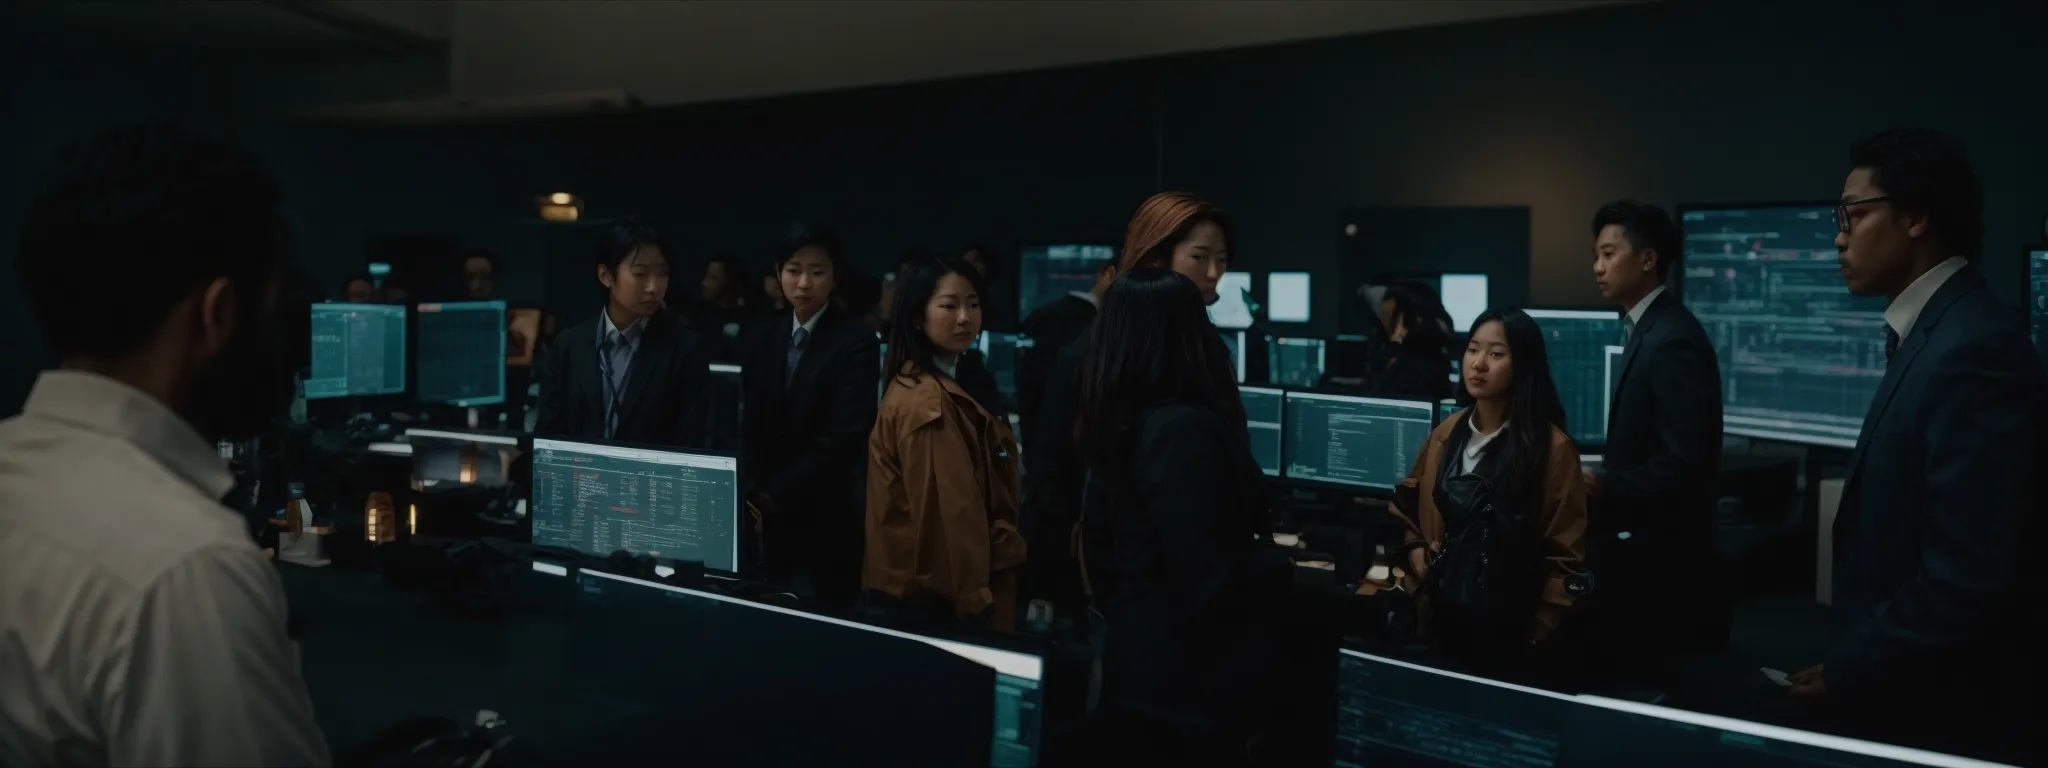 a group of diverse professionals gather around a large, illuminated computer screen to exchange ideas and strategies.